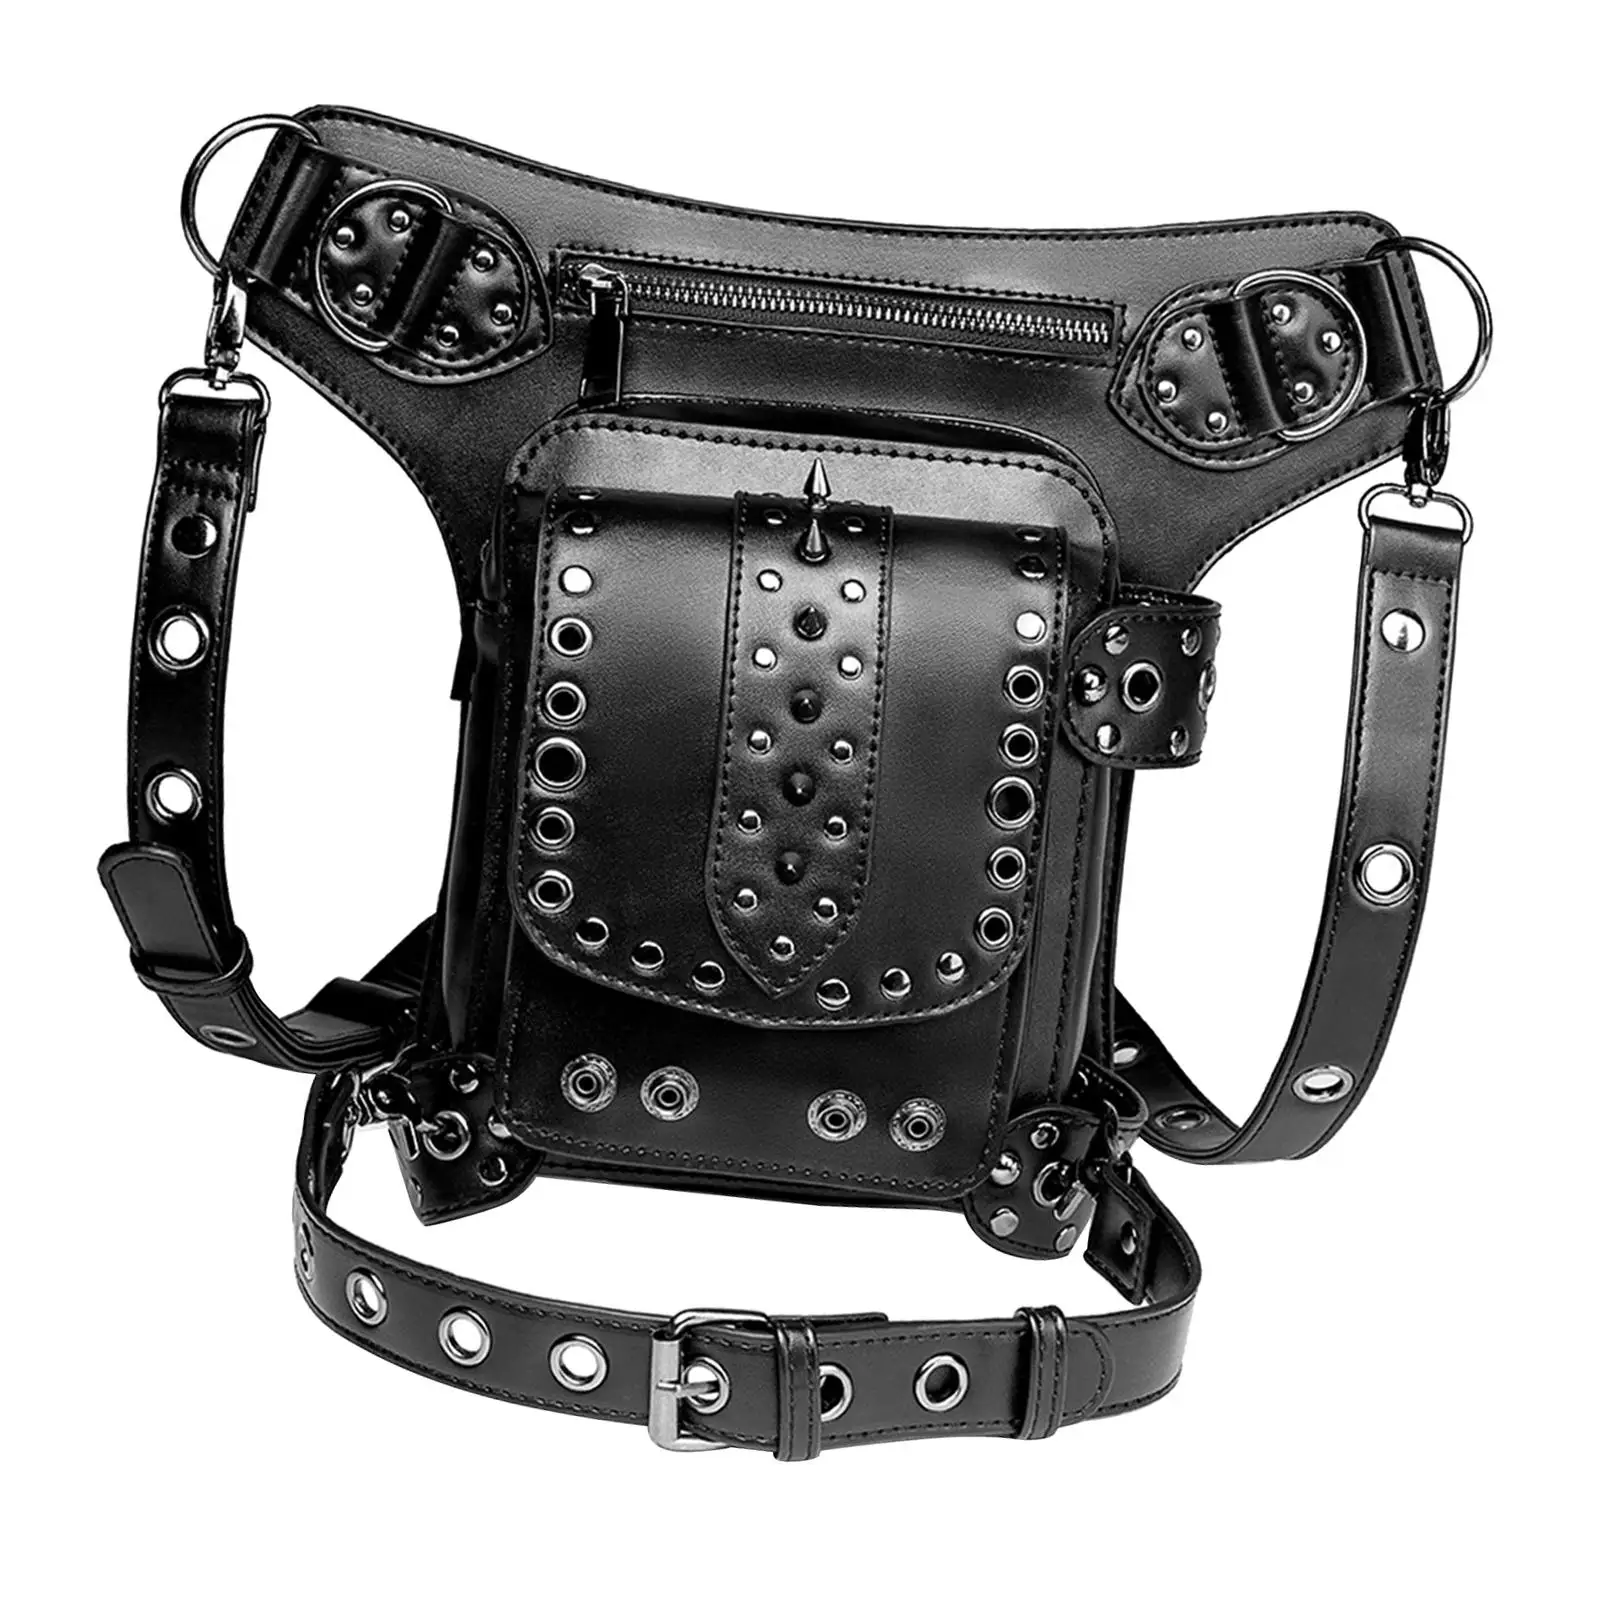 Gothic Steampunk Waist Bag with Detachable Strap Leg Hip Pack Fashion Waist Pack Purse for Running Cycling Motorcycle Climbing